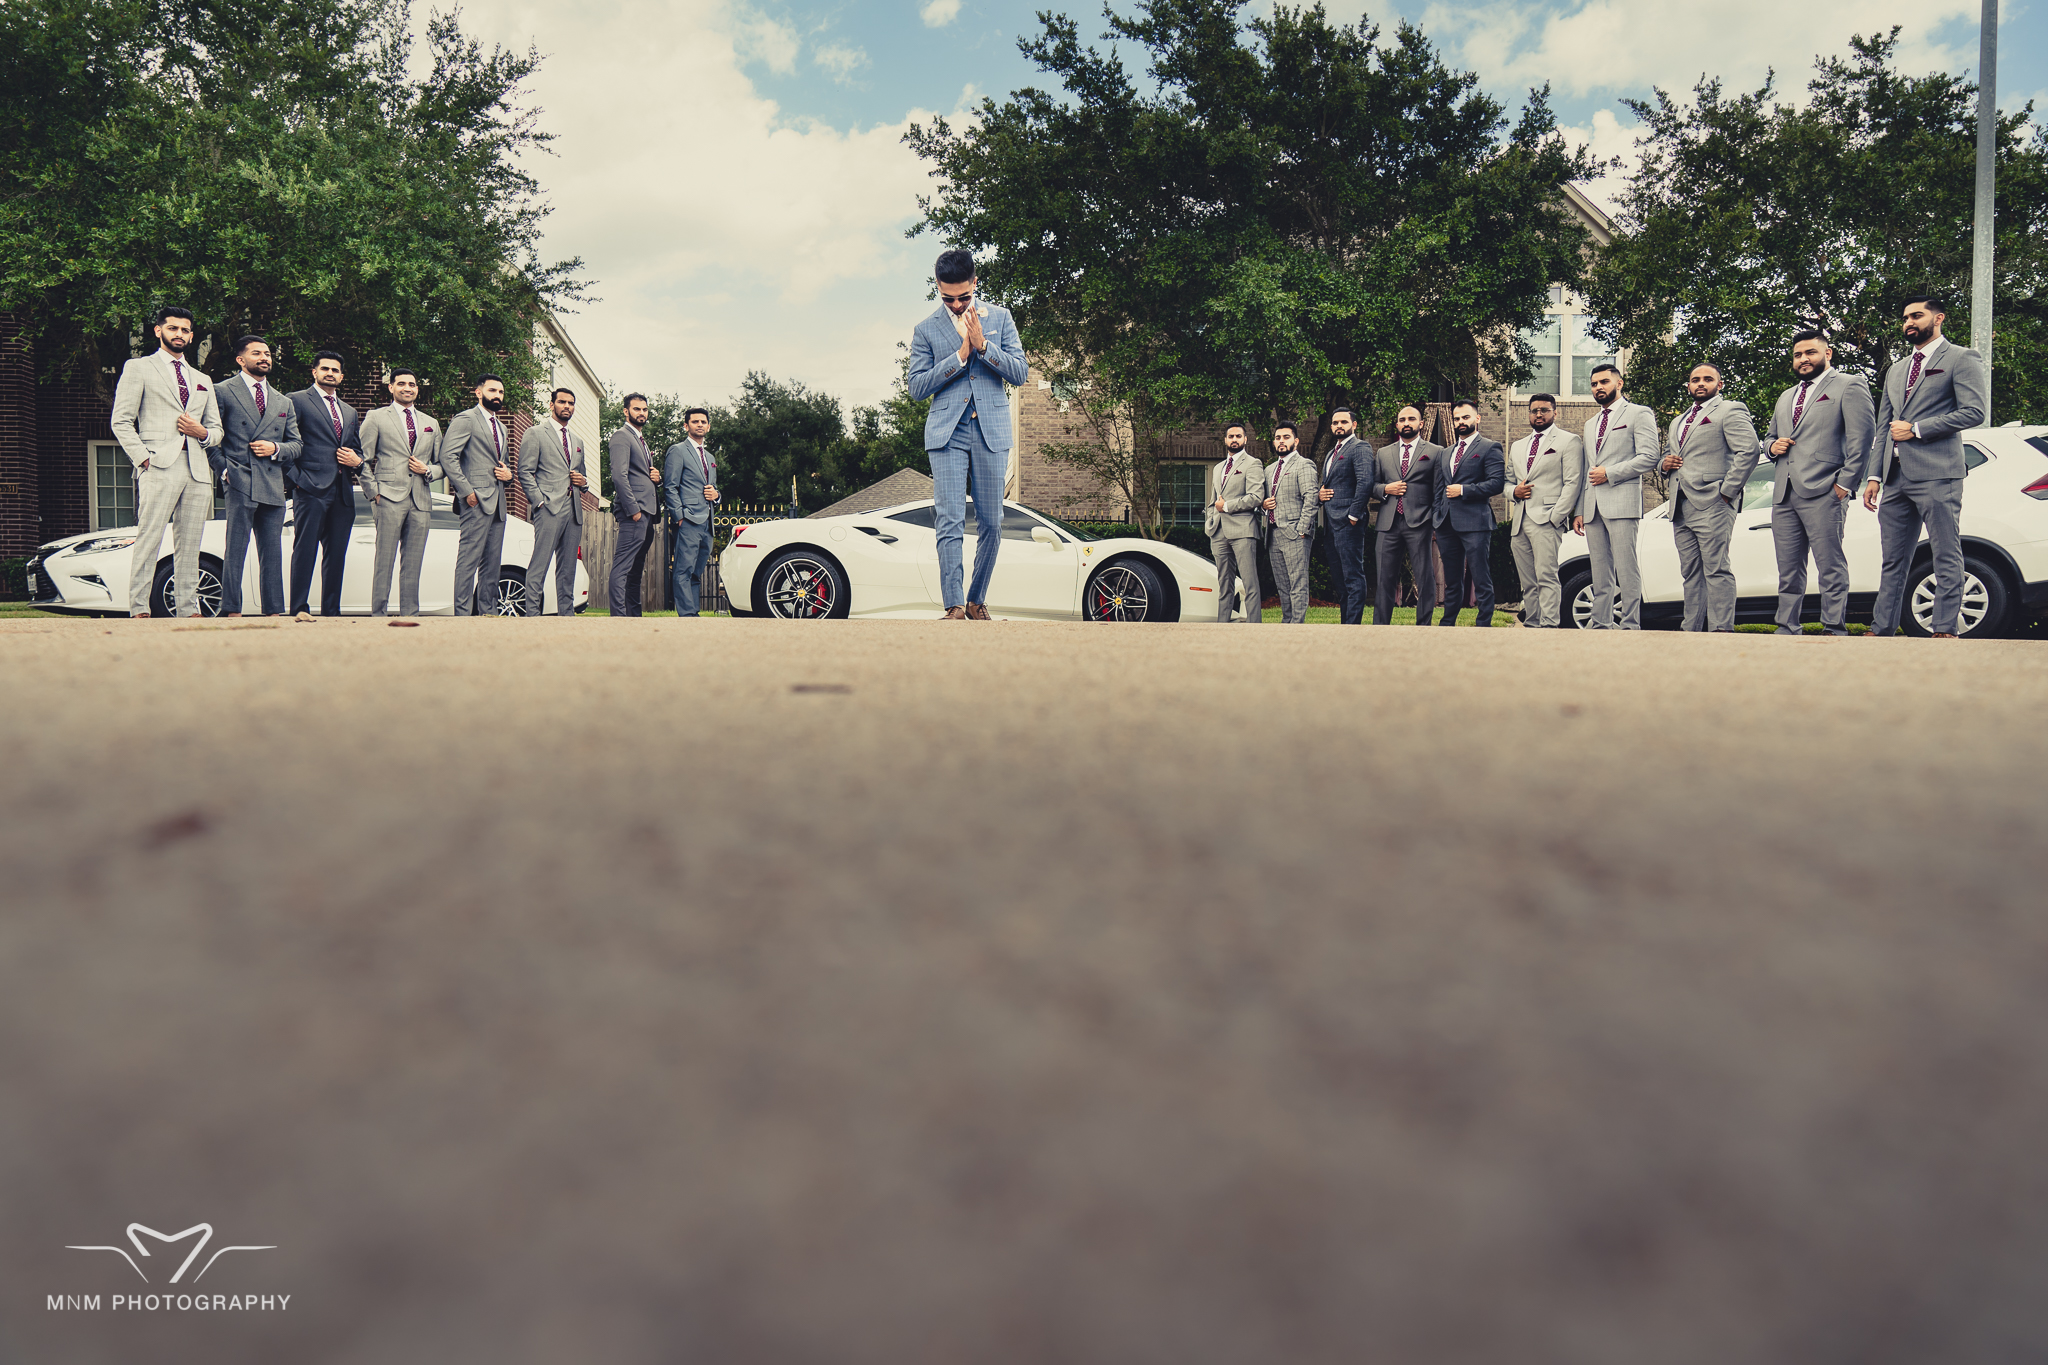 Groomsmen help with wedding ring selection - MnM Photography